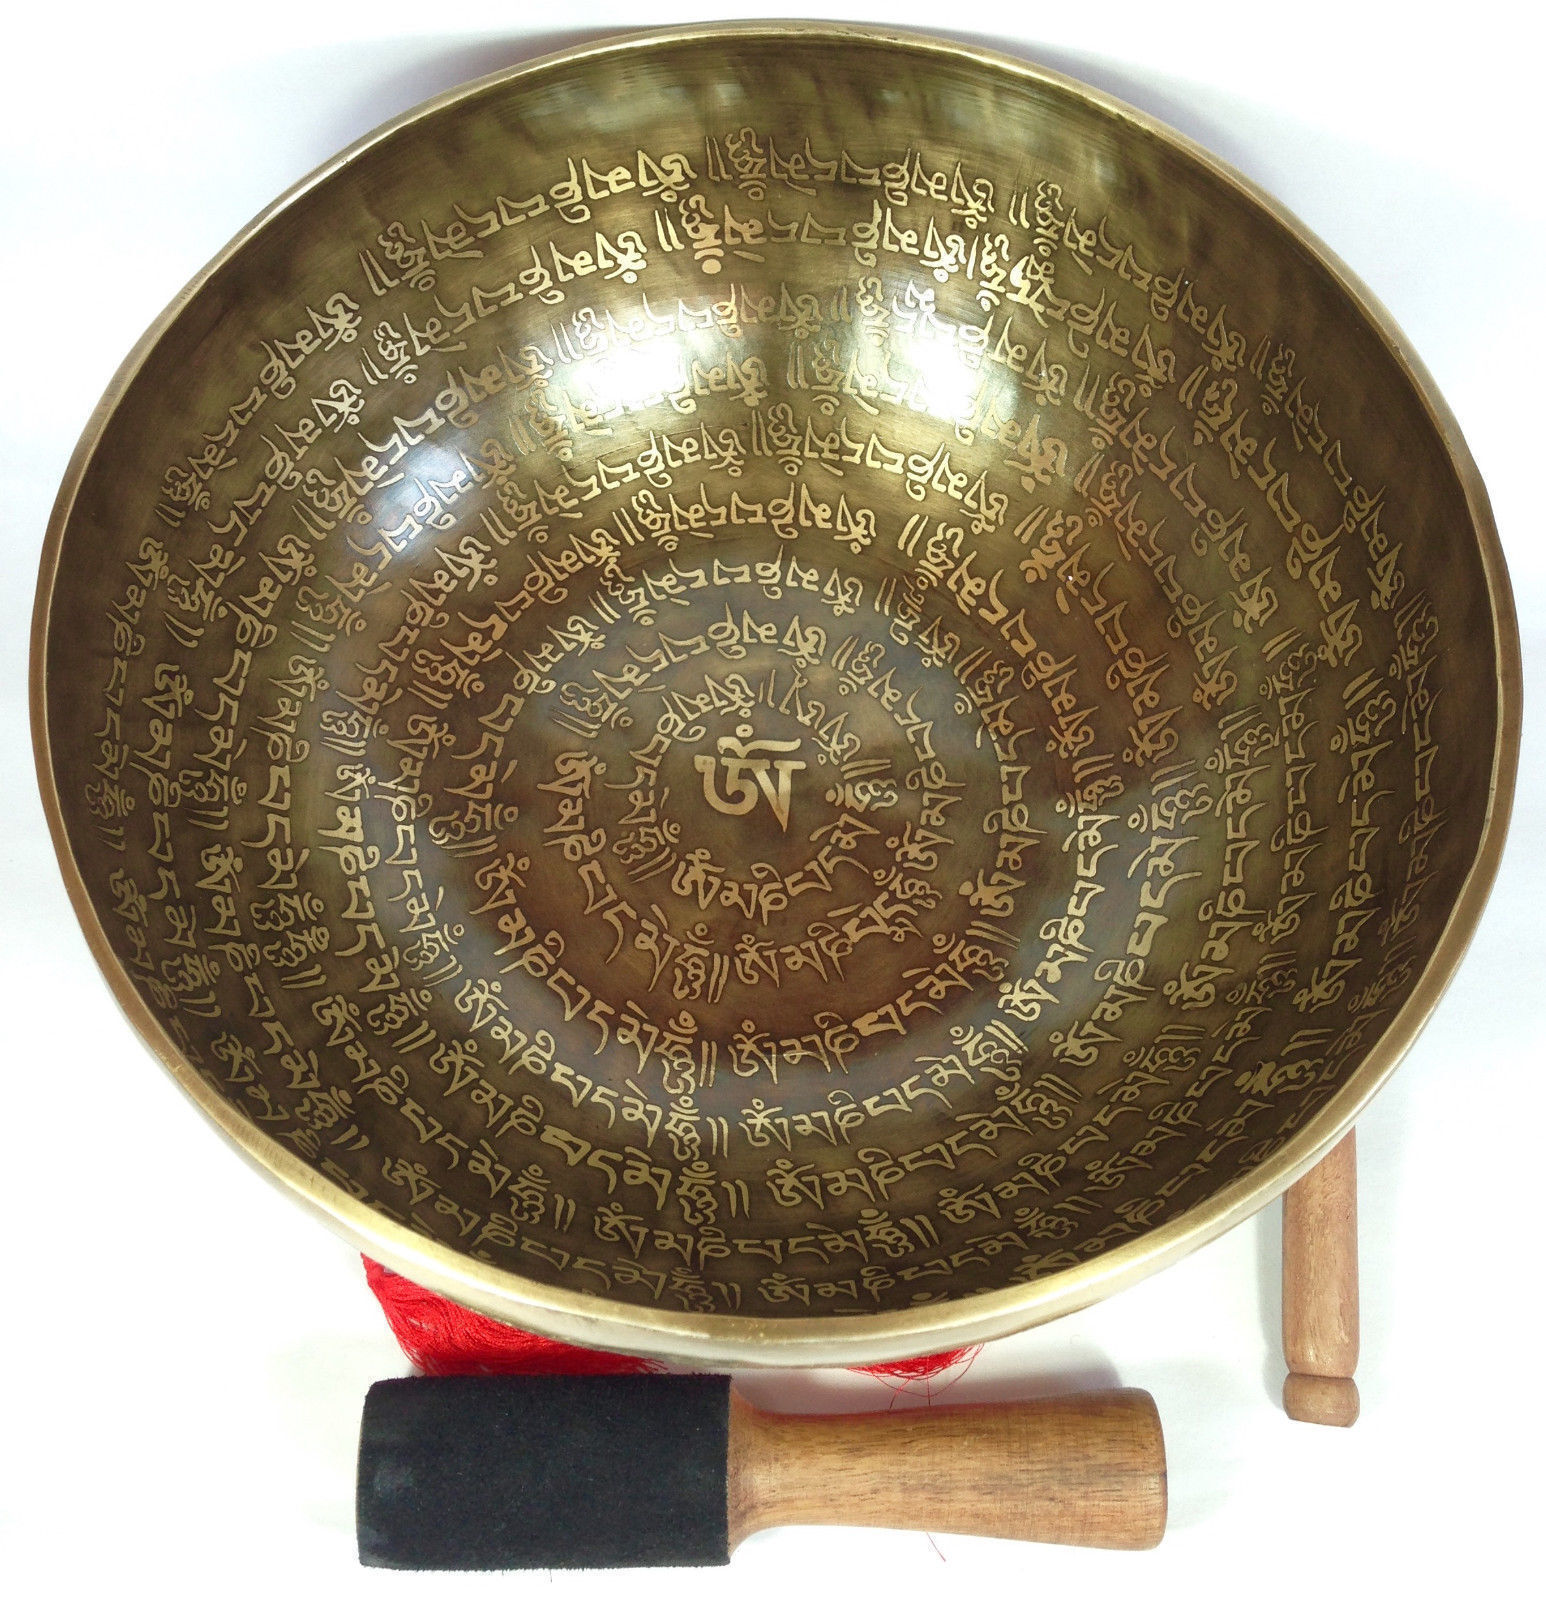 11 Inches Full Mantra Om Mane Padme Hum-Singing Bowl from Nepal-Healing Bowl